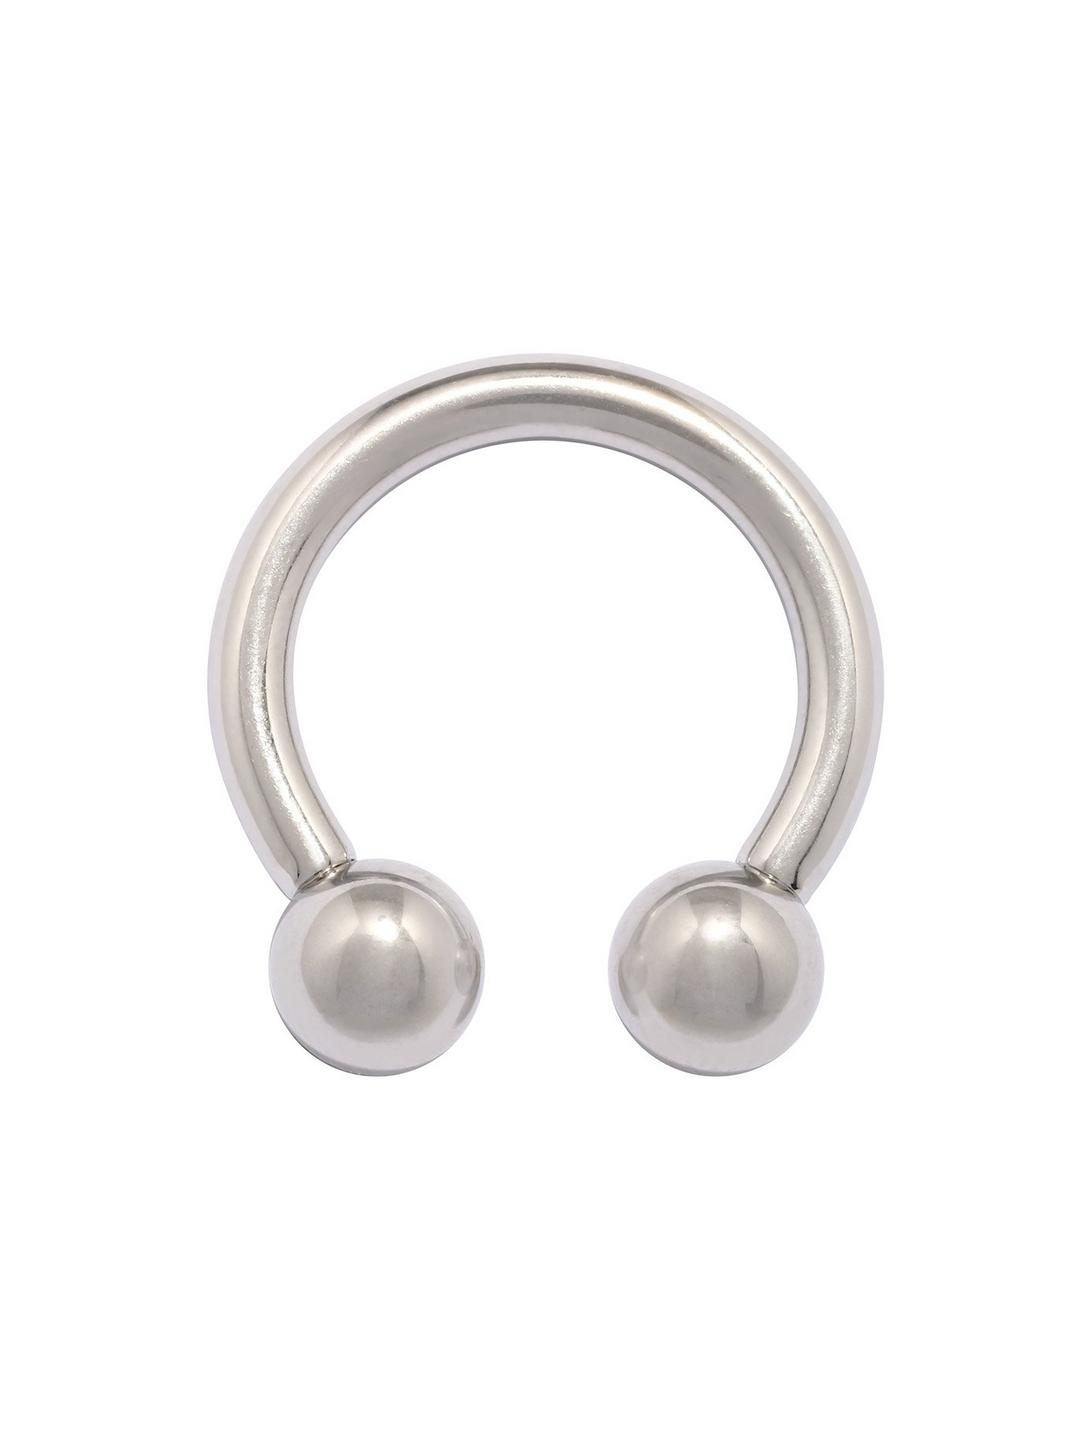 10G 9/16 Surgical Steel Circular Barbell, SILVER, hi-res